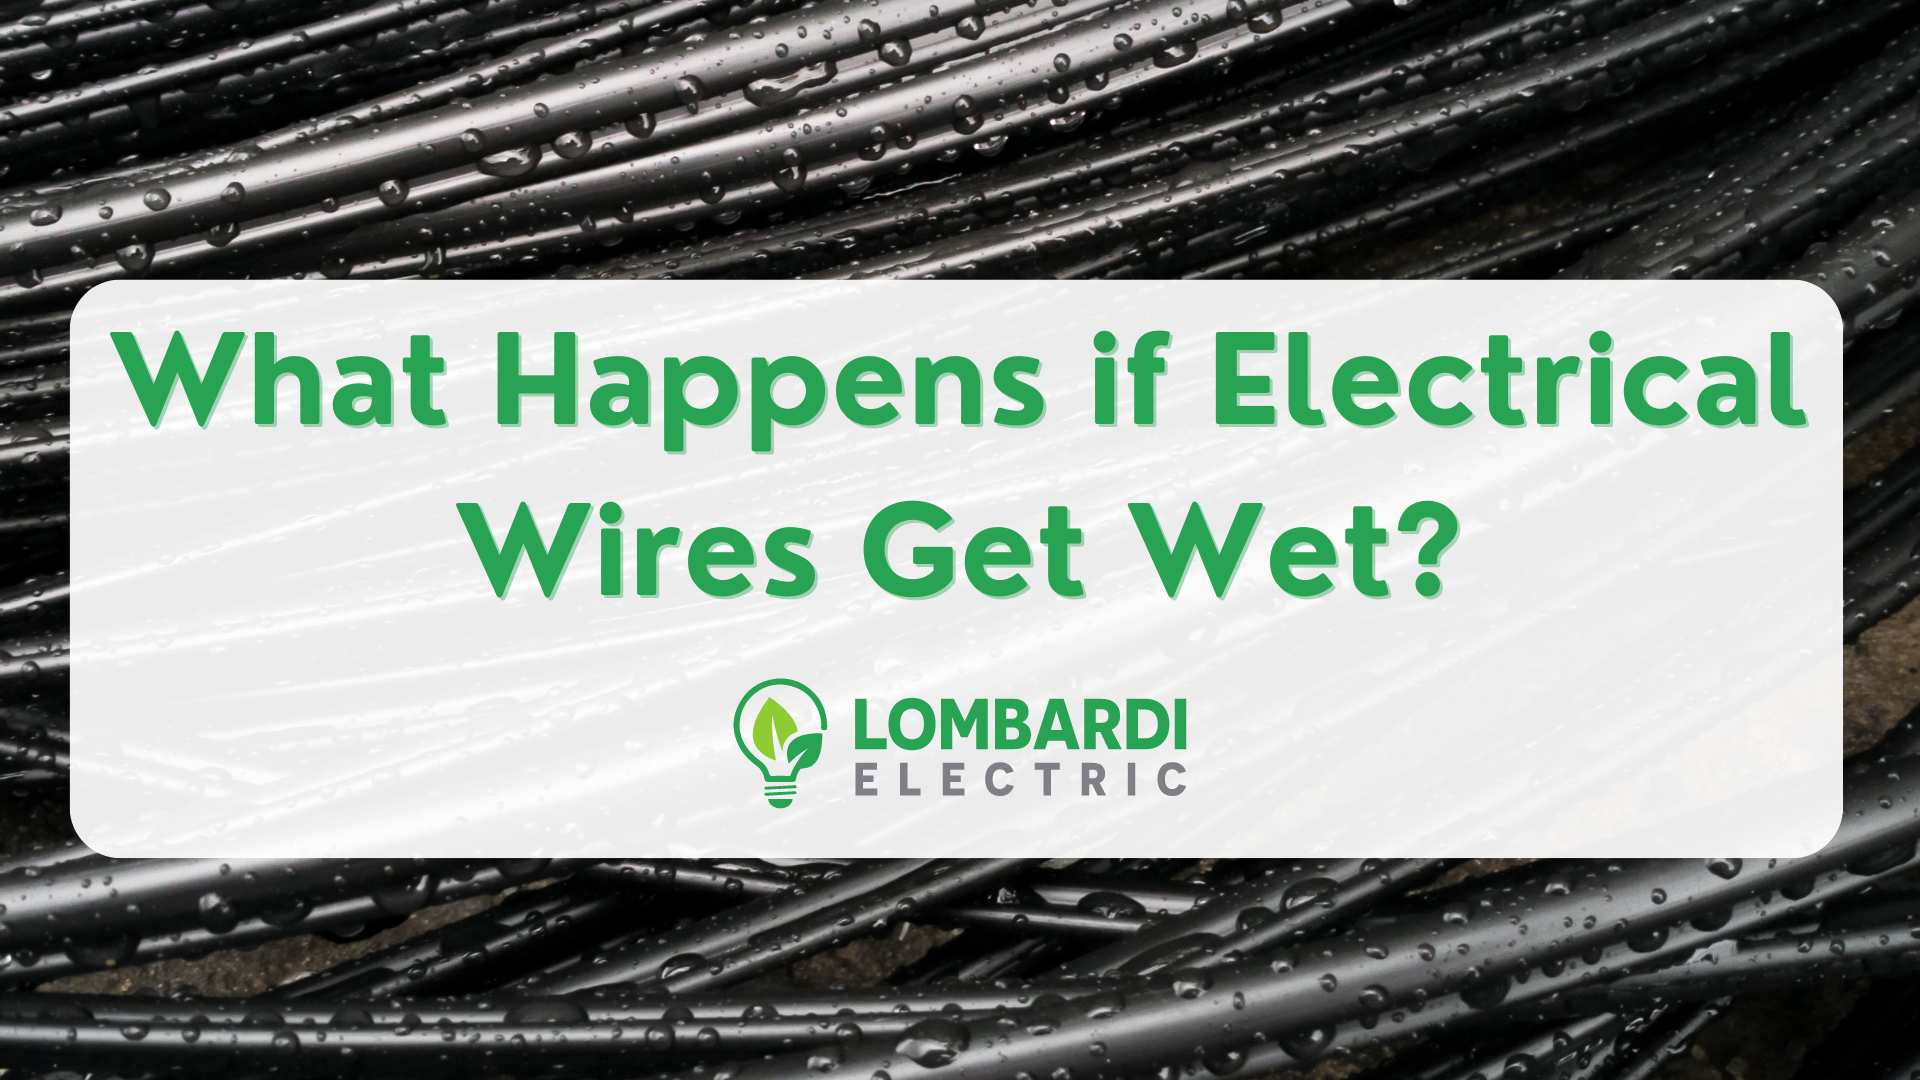 What Happens if Electrical Wires Get Wet